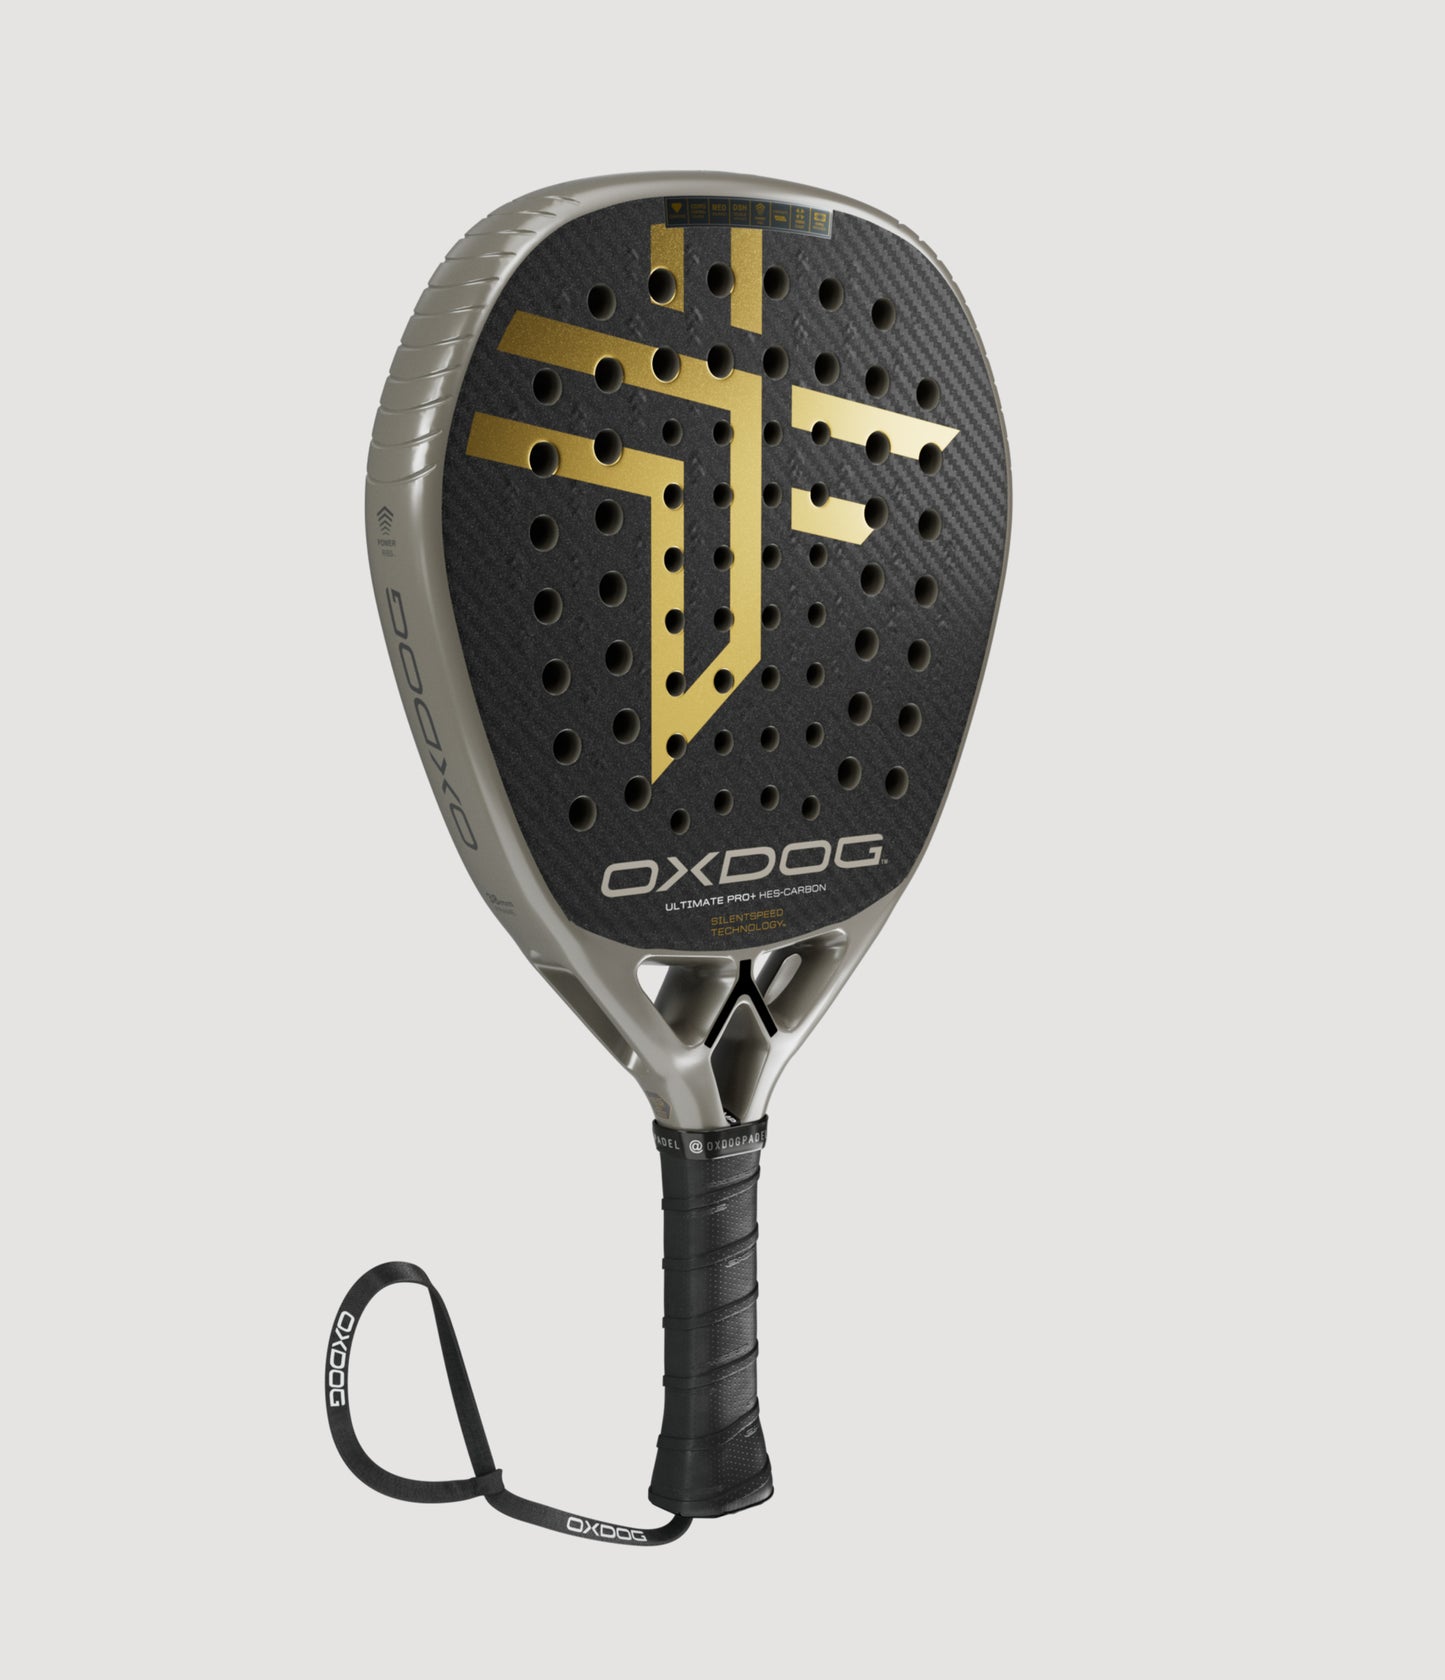 Oxdog Ultimate Pro+ 24